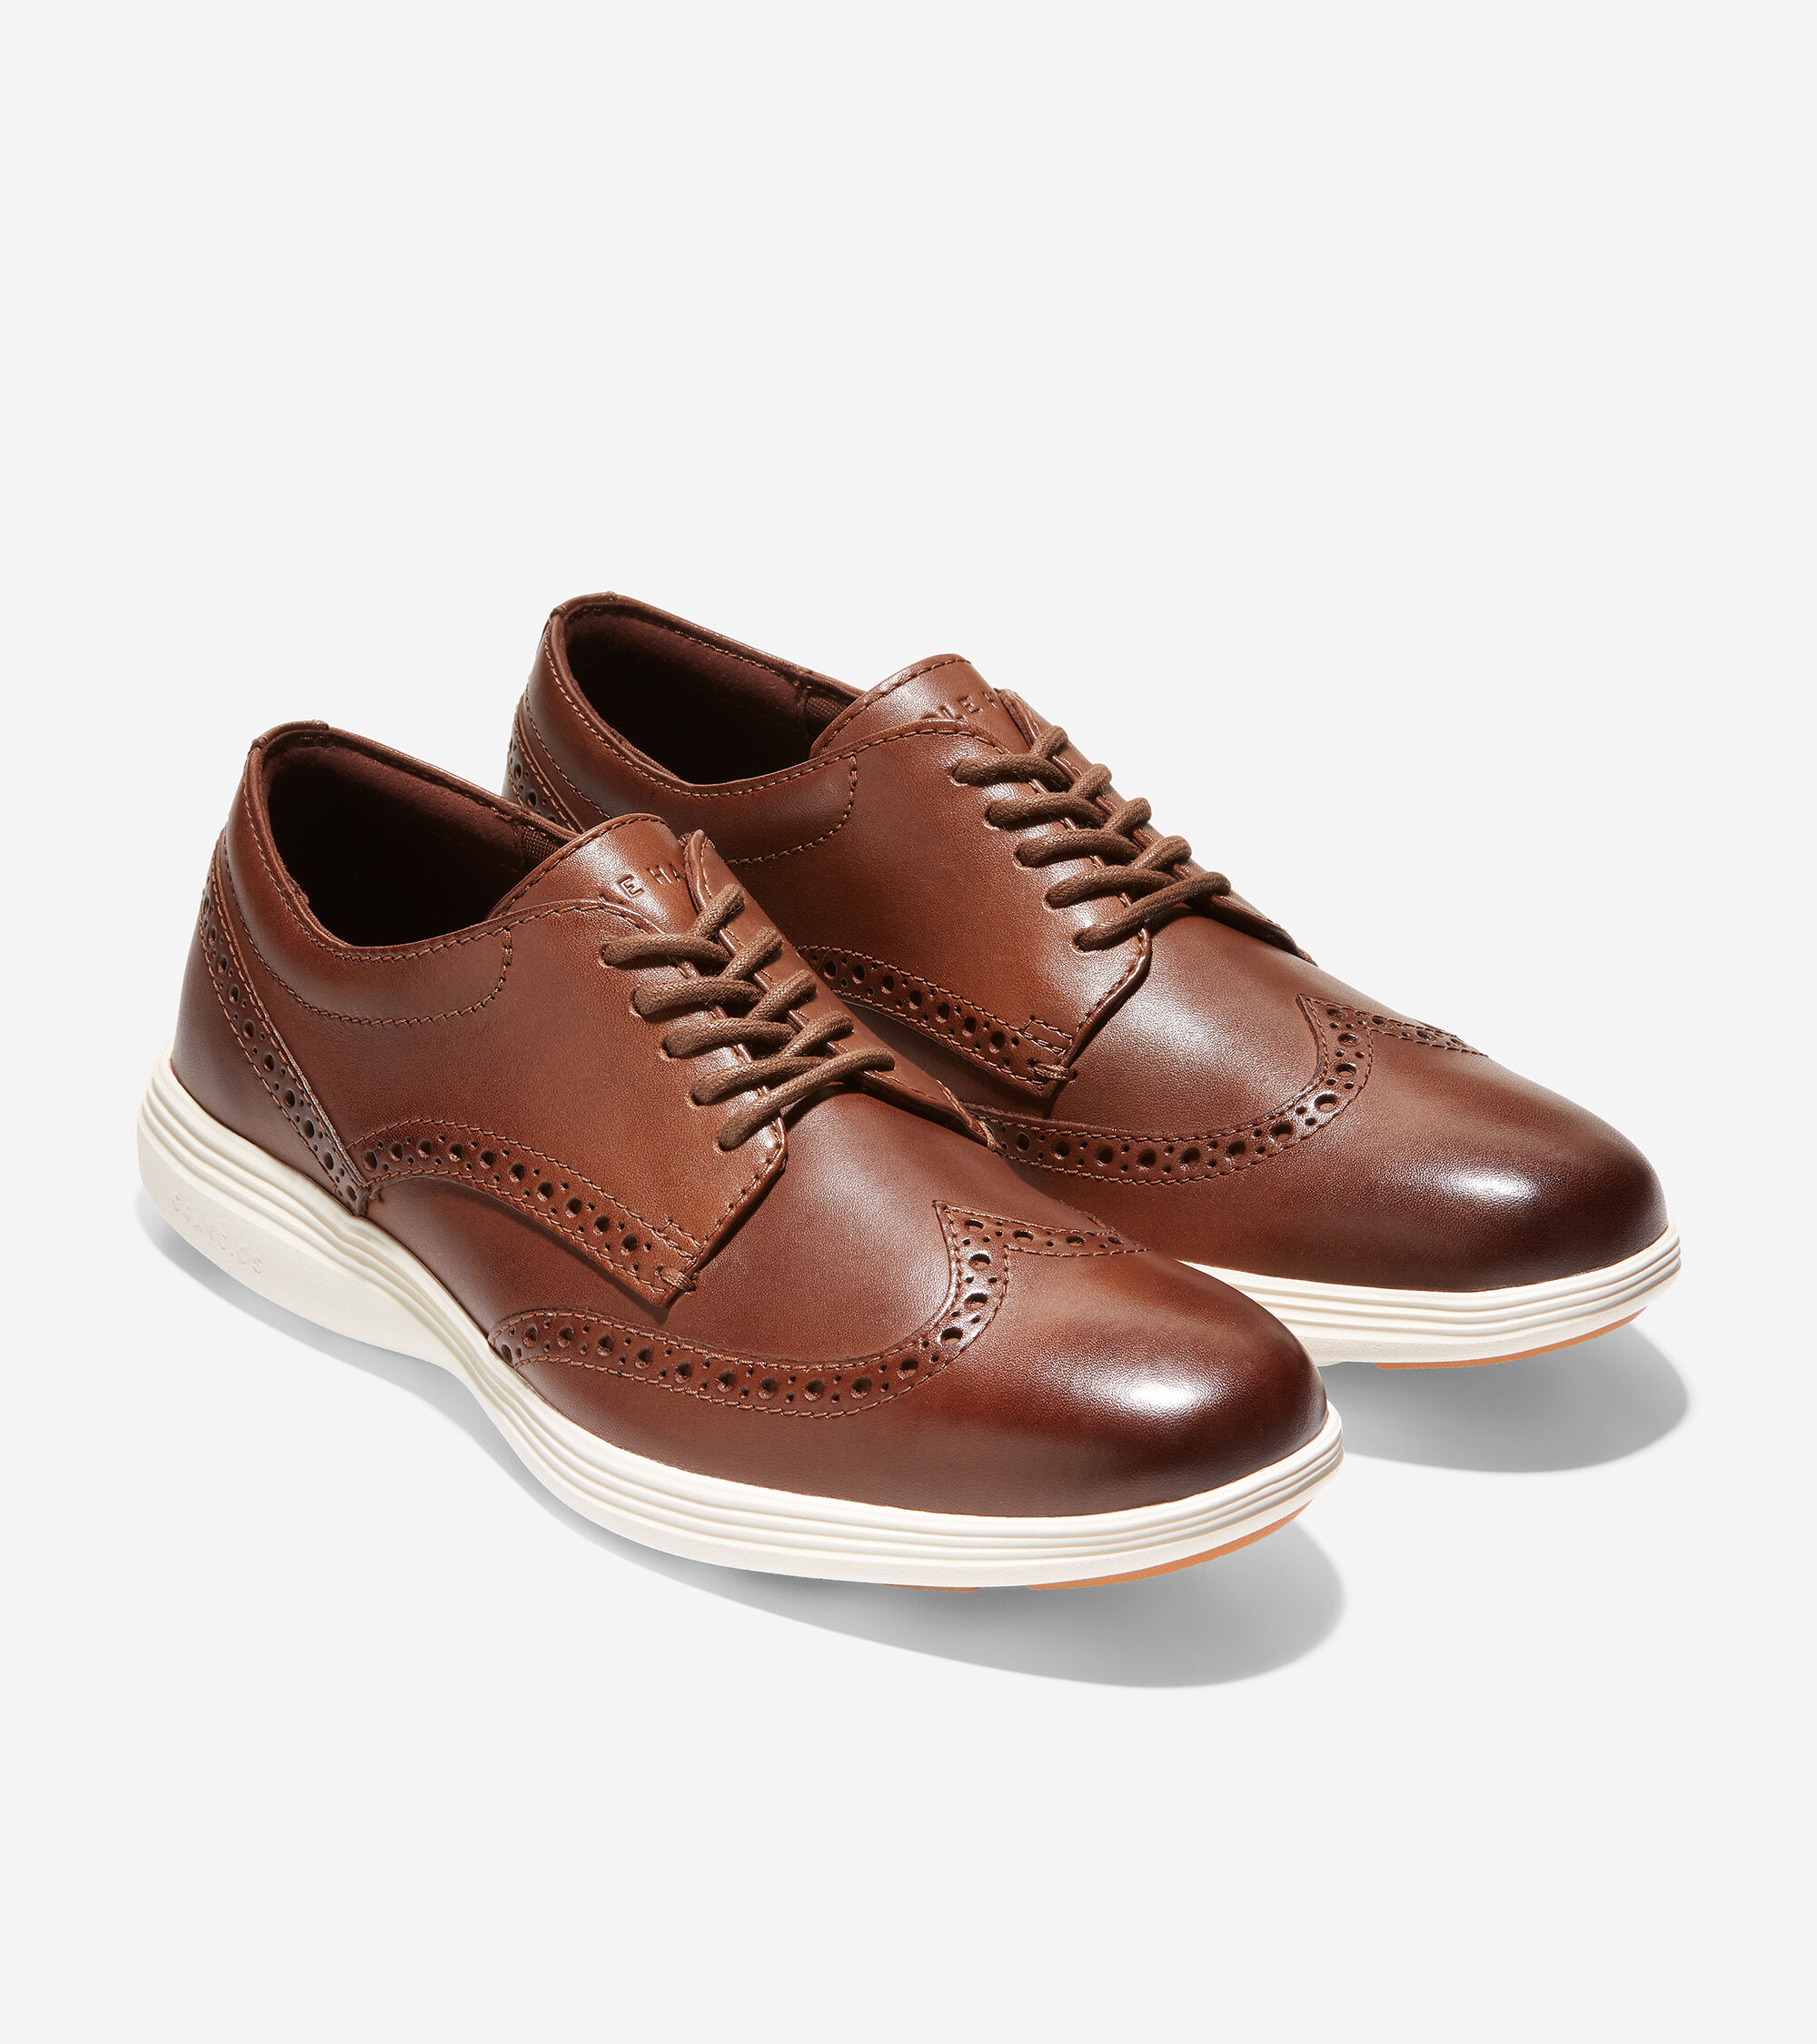 Grand Tour Wingtip Oxford in Woodbury 